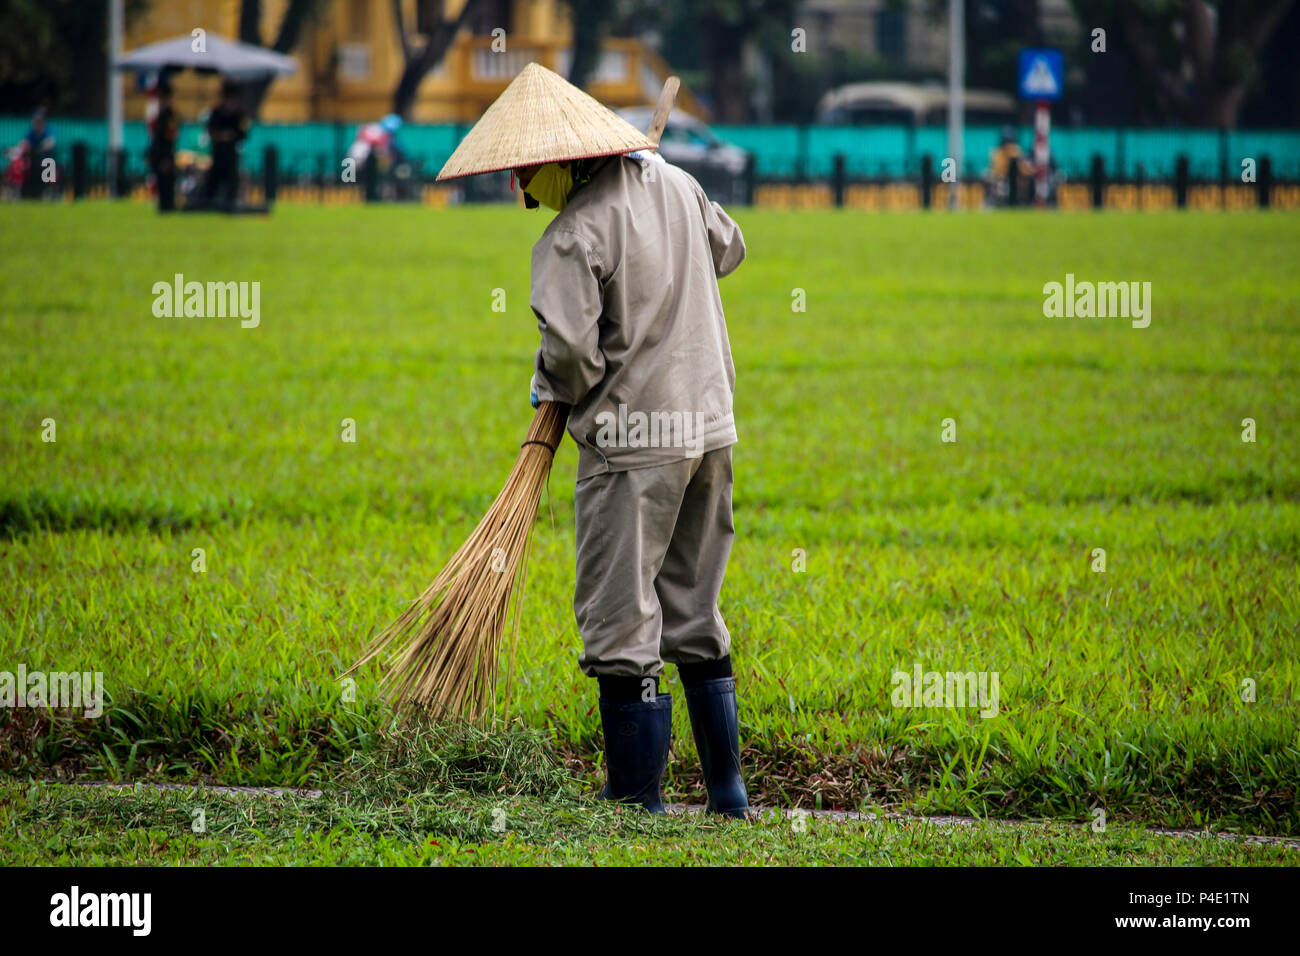 Hanoi, Vietnam - March 15, 2018: Gardener cleaning the grass between the Vietnamese government building and the Ho Chi Min mausoleum Stock Photo